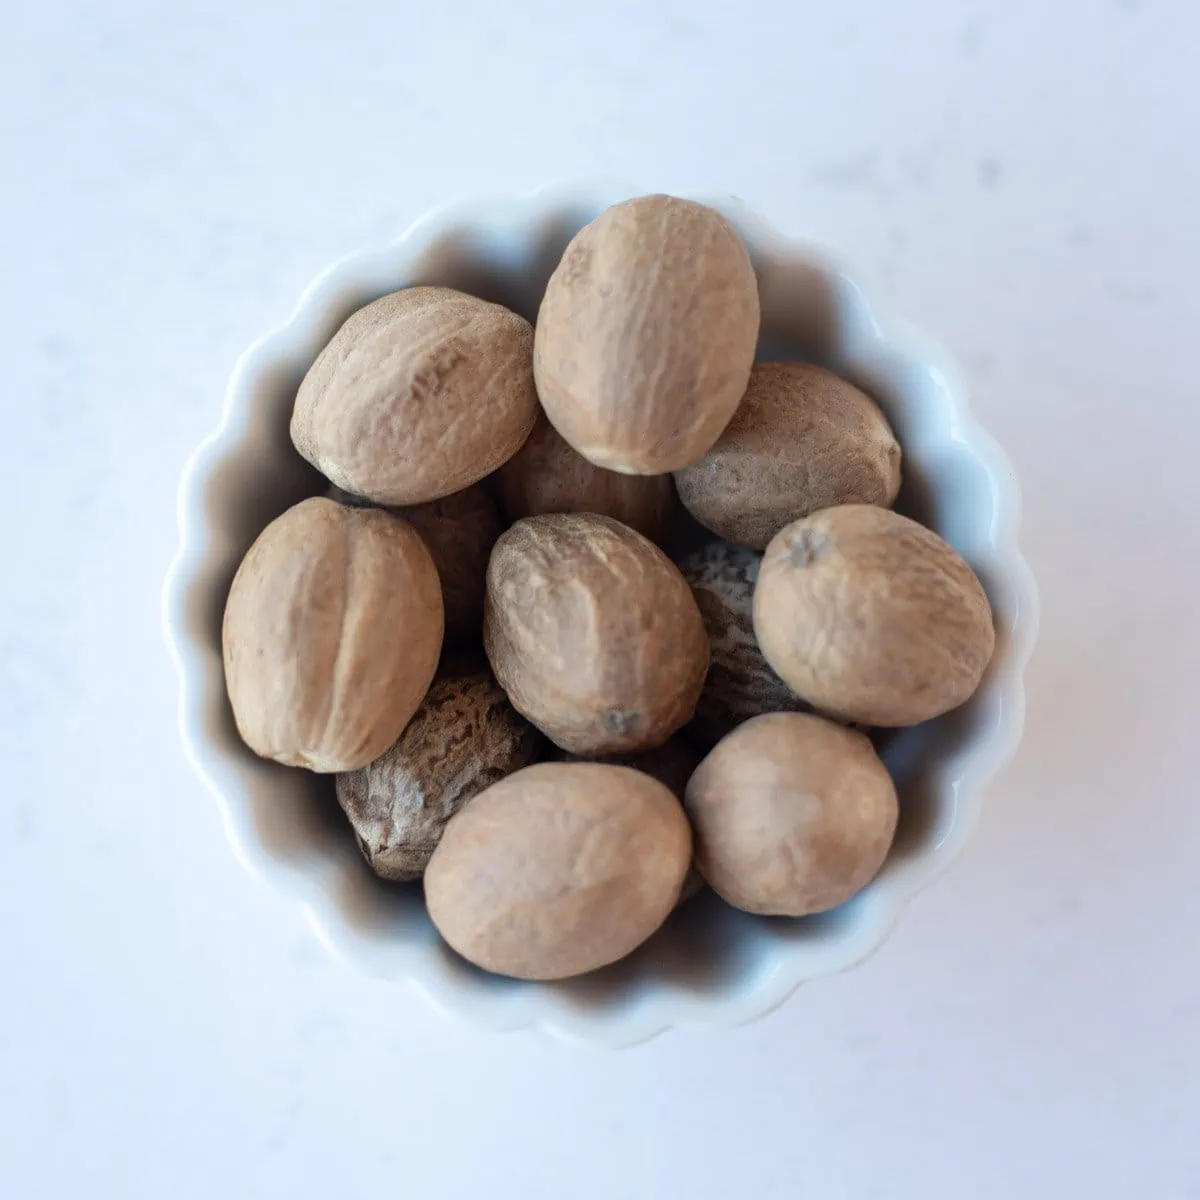 Nutmeg seeds in a small white bowl